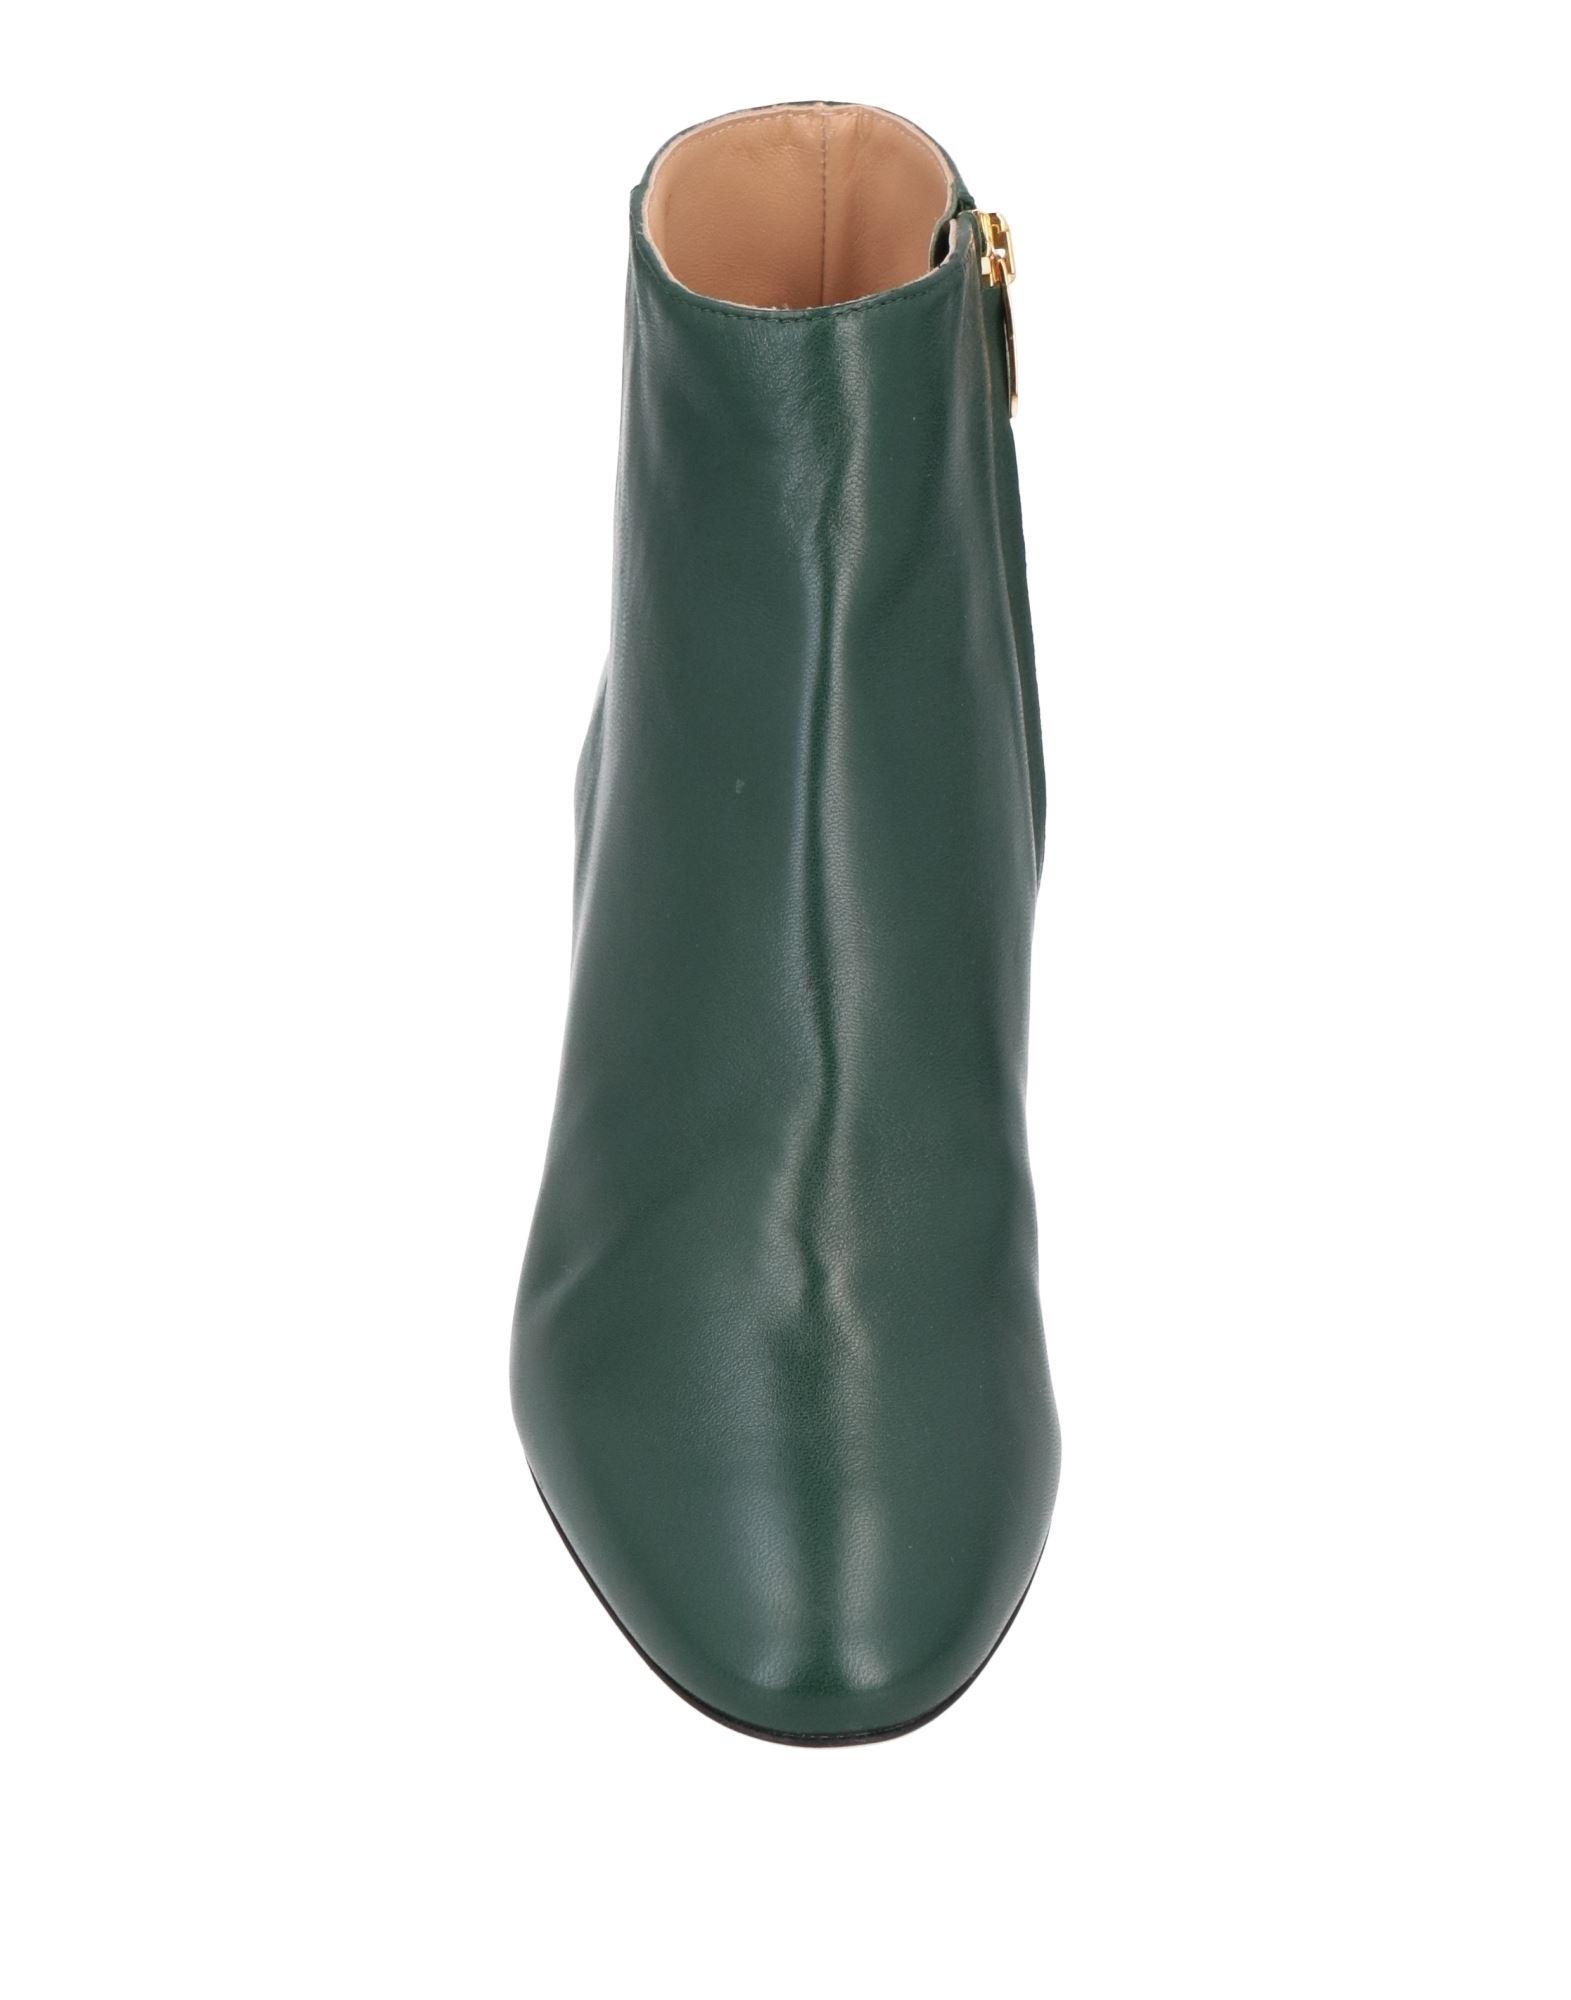 Sergio Rossi Ankle Boots in Green | Lyst